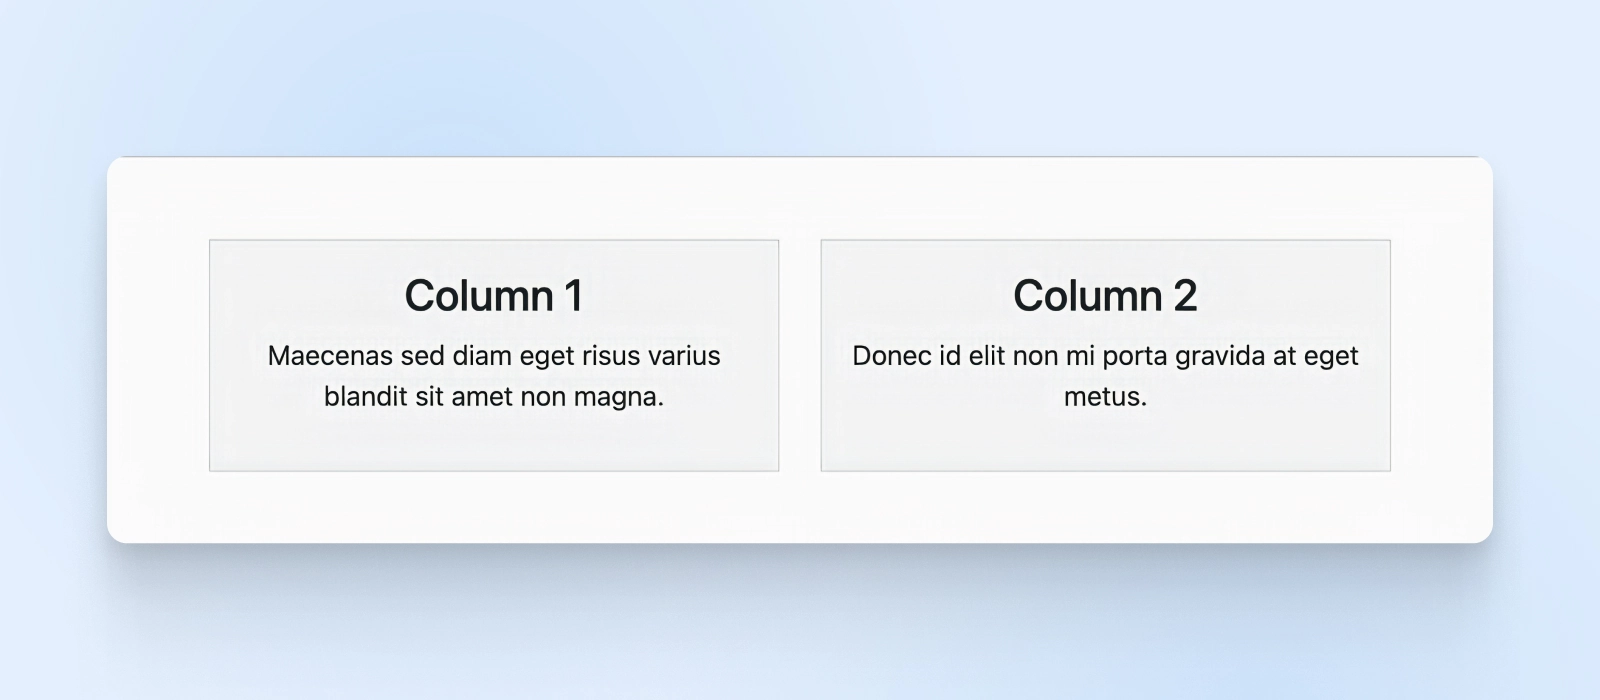 Two column examples with Lorum ipsum text appear against a light blue background